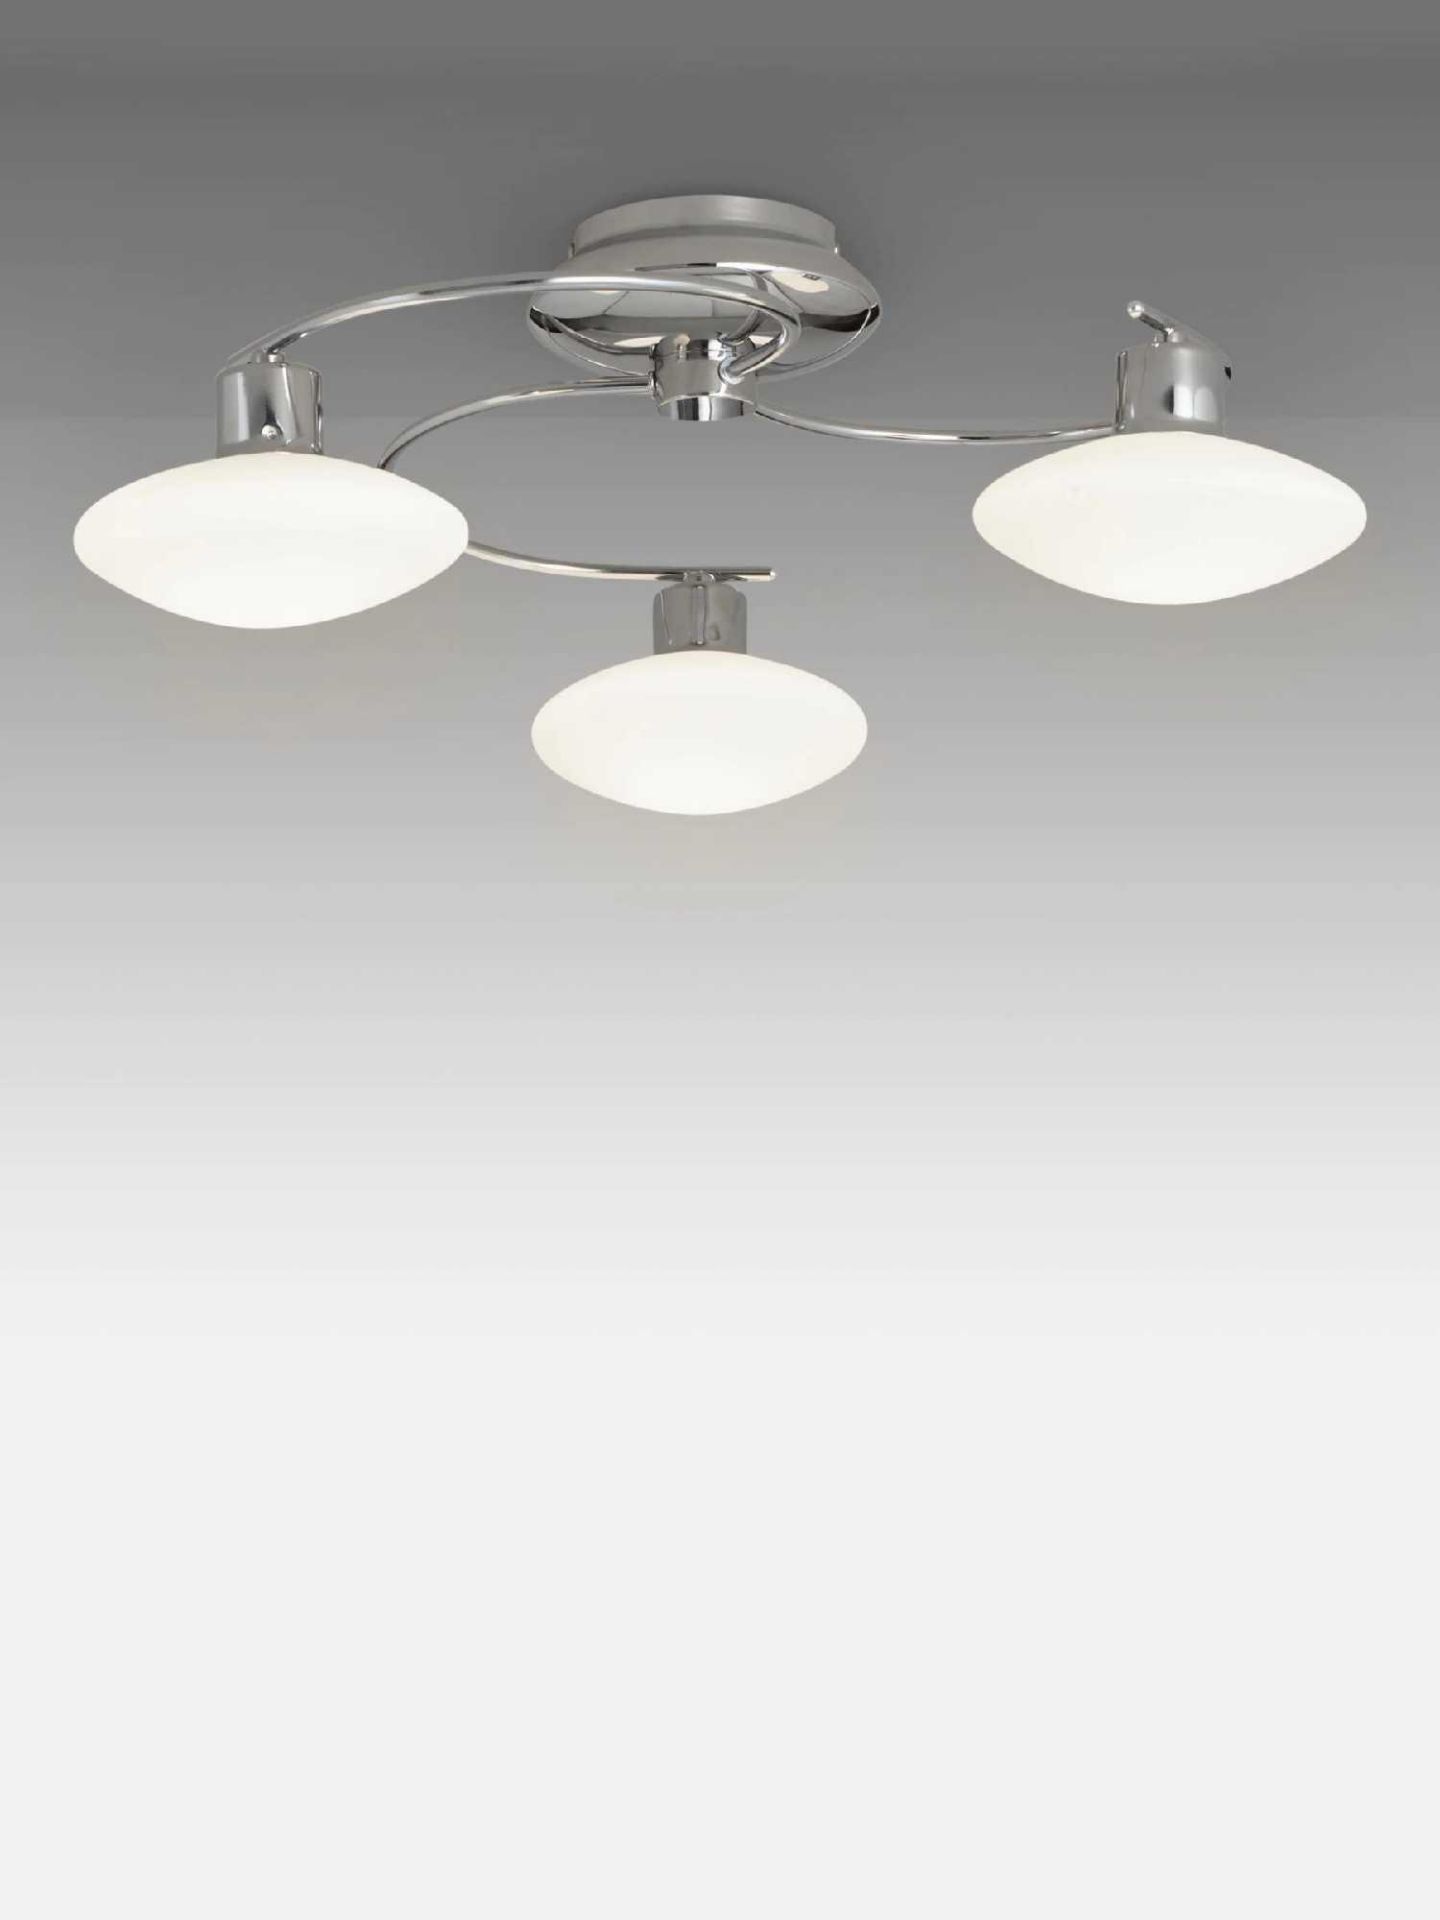 Rrp £125 Boxed John Lewis And Partners Tameo 3-Light Chrome Finish Ceiling Light Pendant With Opal G - Image 2 of 2